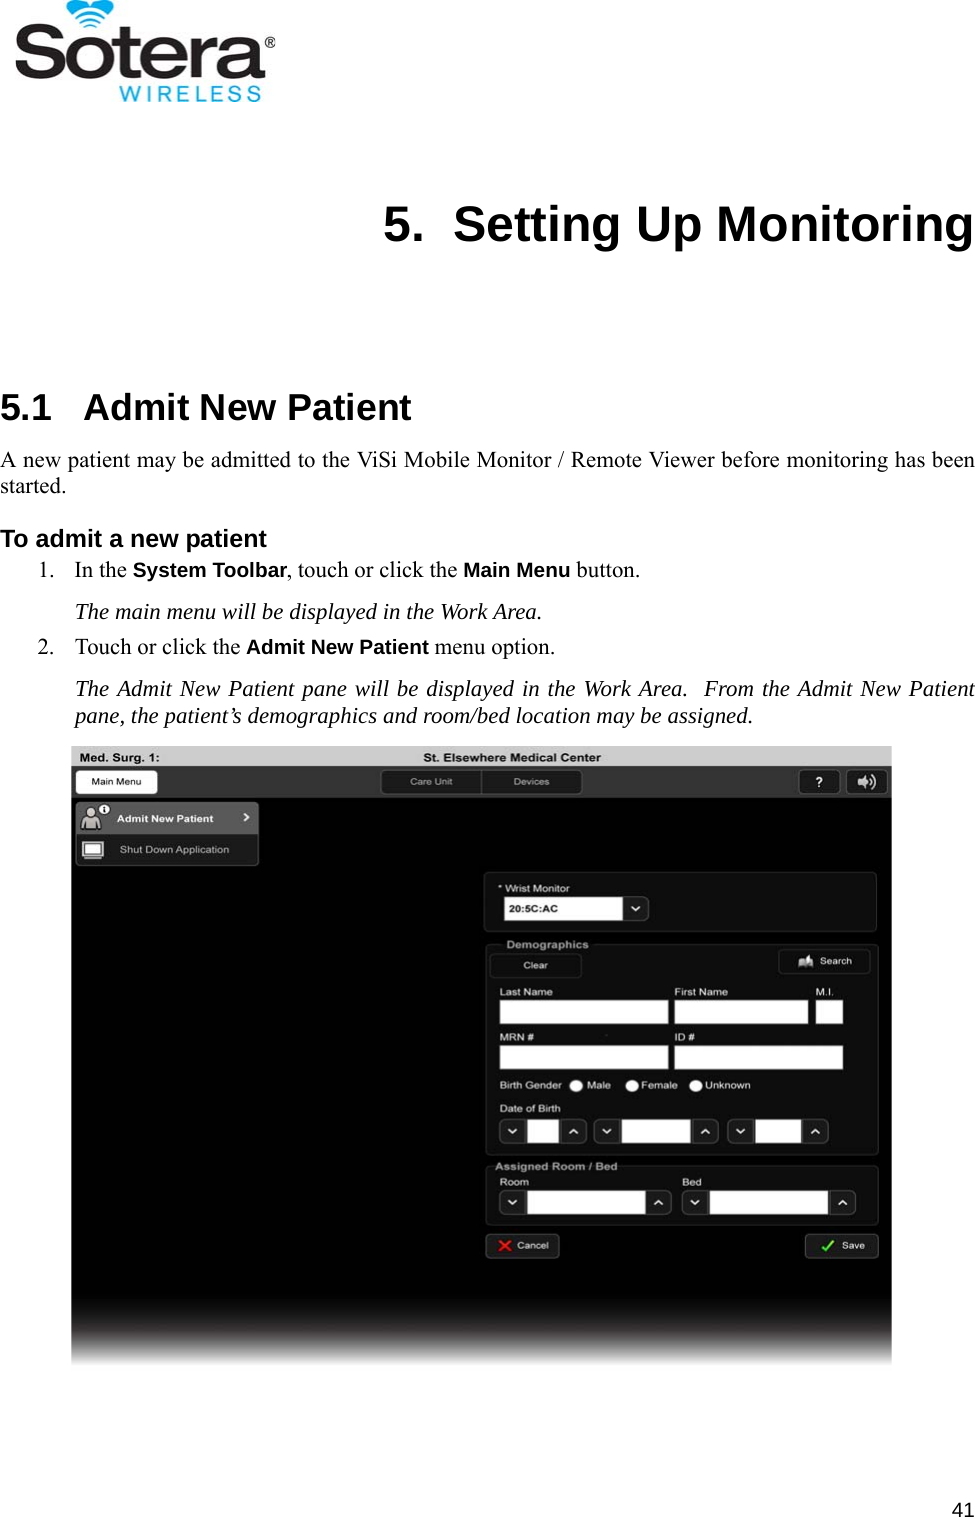 415.  Setting Up Monitoring5.1   Admit New PatientA new patient may be admitted to the ViSi Mobile Monitor / Remote Viewer before monitoring has beenstarted.To admit a new patient1. In the System Toolbar, touch or click the Main Menu button.The main menu will be displayed in the Work Area.2. Touch or click the Admit New Patient menu option.The Admit New Patient pane will be displayed in the Work Area.  From the Admit New Patientpane, the patient’s demographics and room/bed location may be assigned.